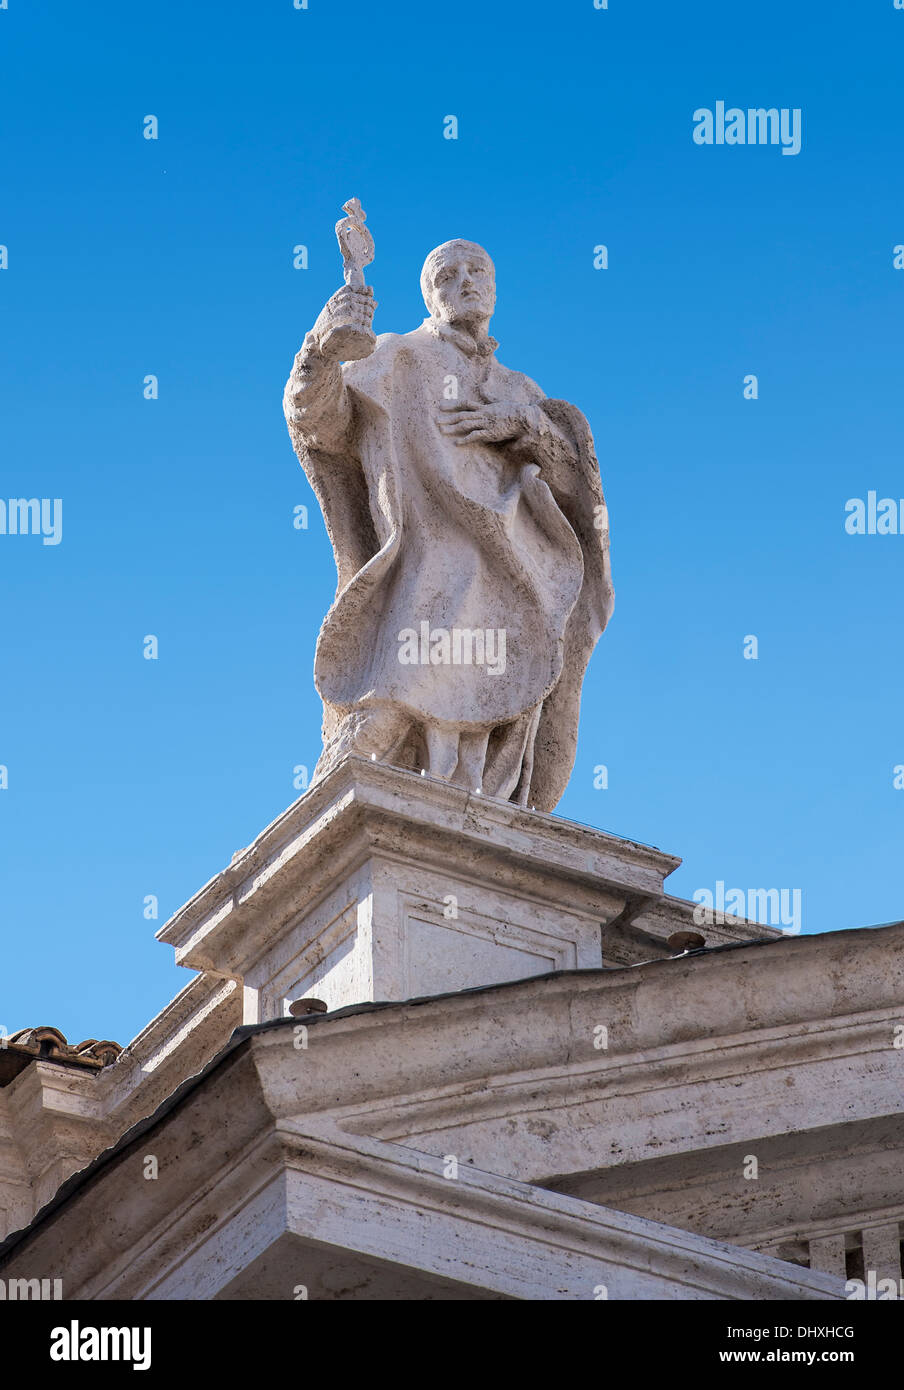 St Norbert statue, Bernini's colonnade surrounding St Peter's Square in Vatican City, Rome, Italy Stock Photo